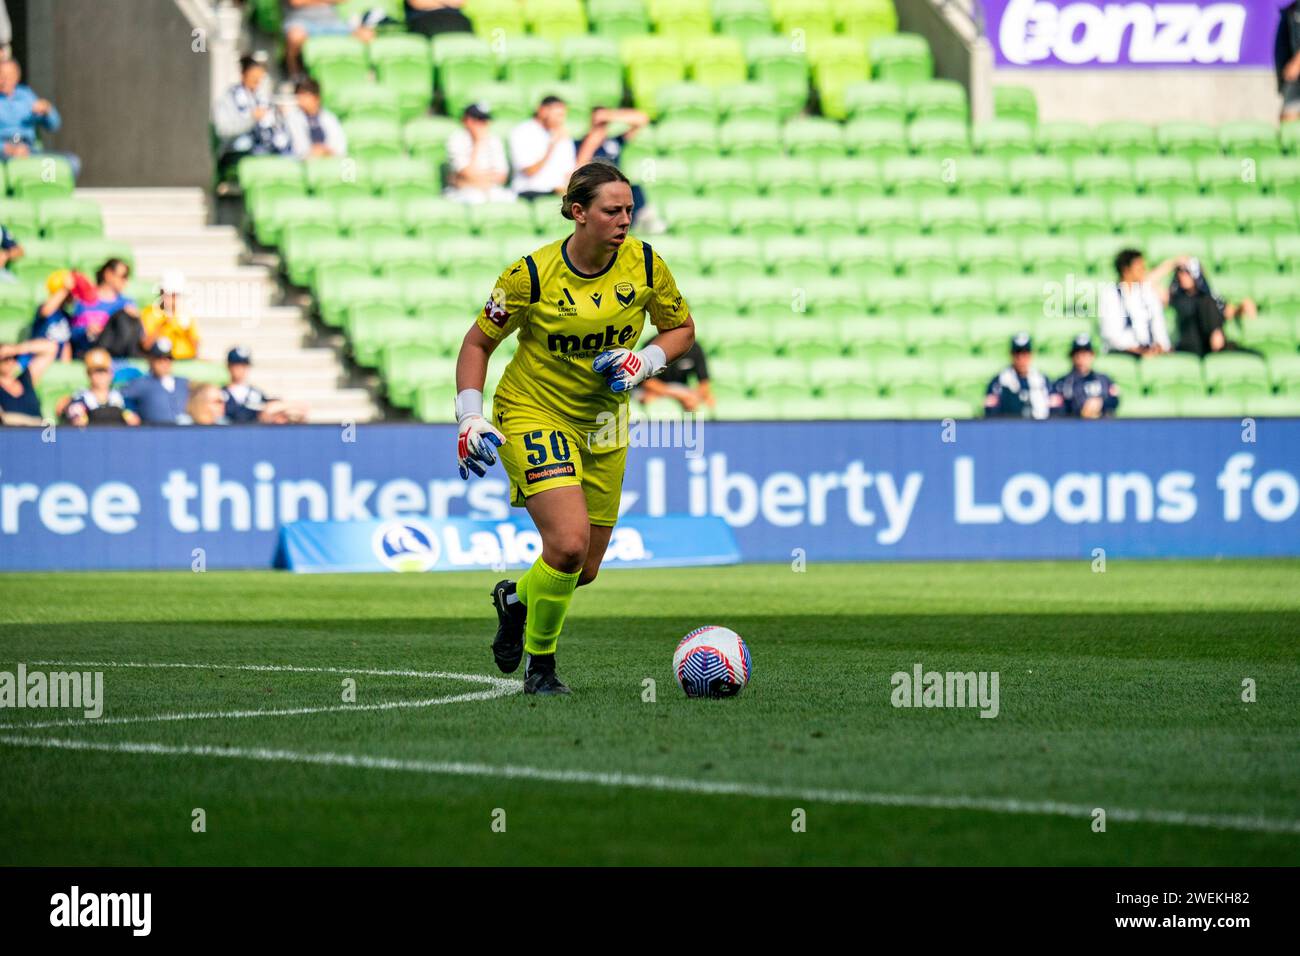 Melbourne, Australia. 26 January, 2024. Melbourne Victory FC Goalkeeper Courtney Newbon (#50) clears the ball out during the Liberty A-League Women’s match between Melbourne Victory FC and Sydney FC at AAMI Park in Melbourne, Australia. Credit: James Forrester/Alamy Live News Stock Photo